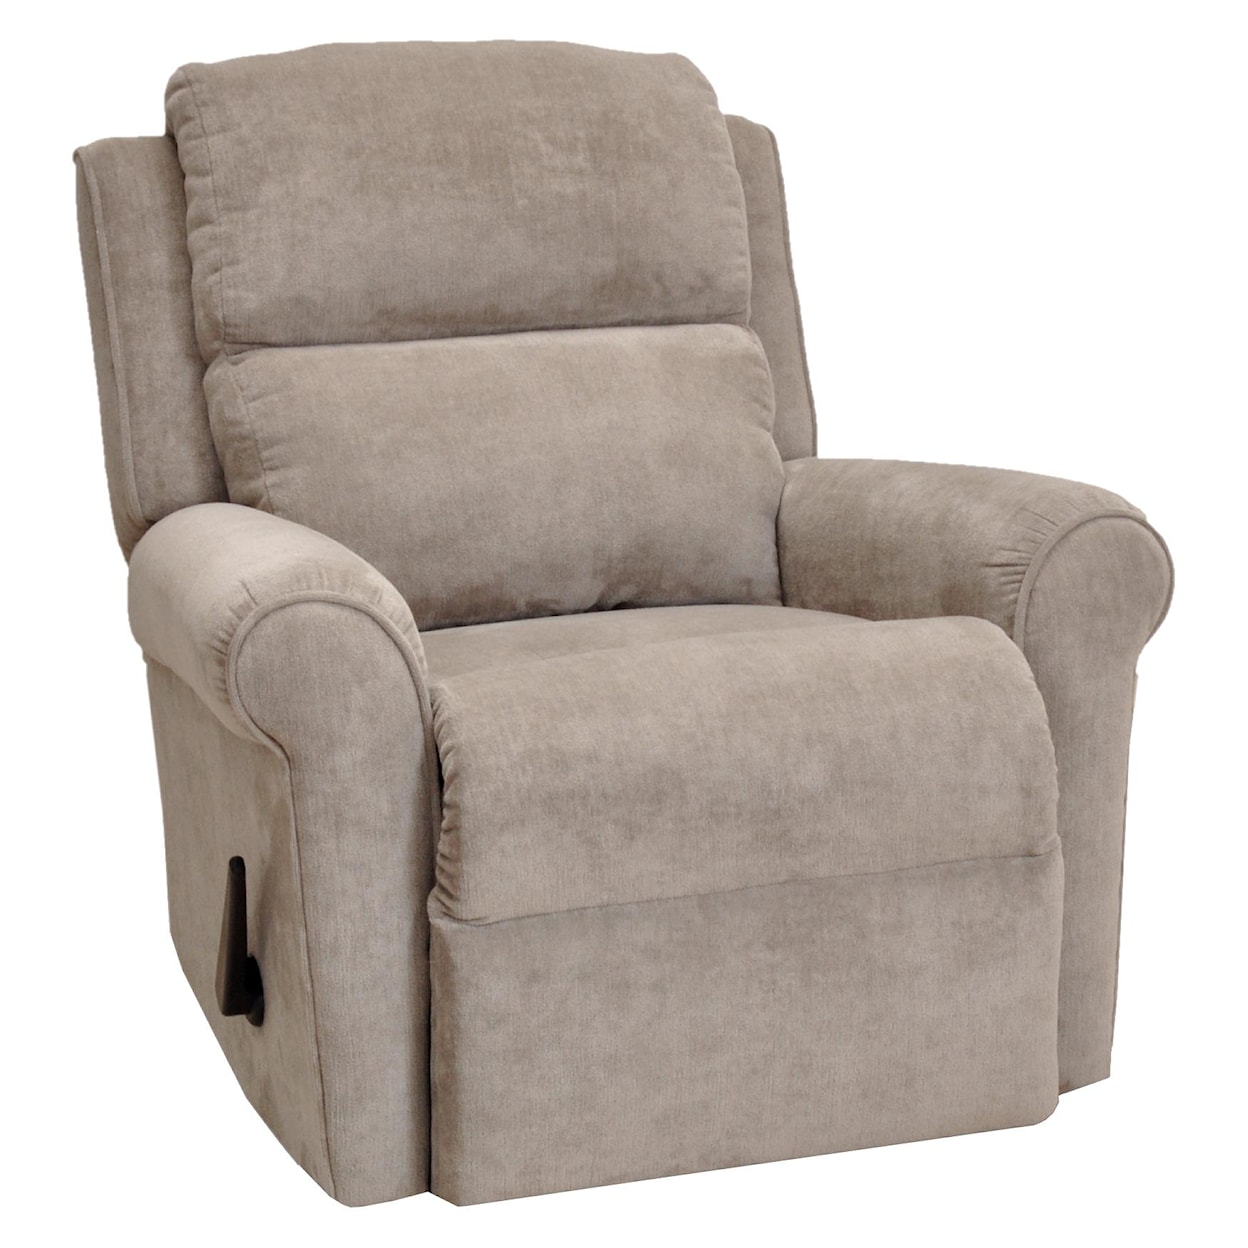 Franklin Franklin Recliners Serenity Power Wall Rec. w/ Layflat and Lift